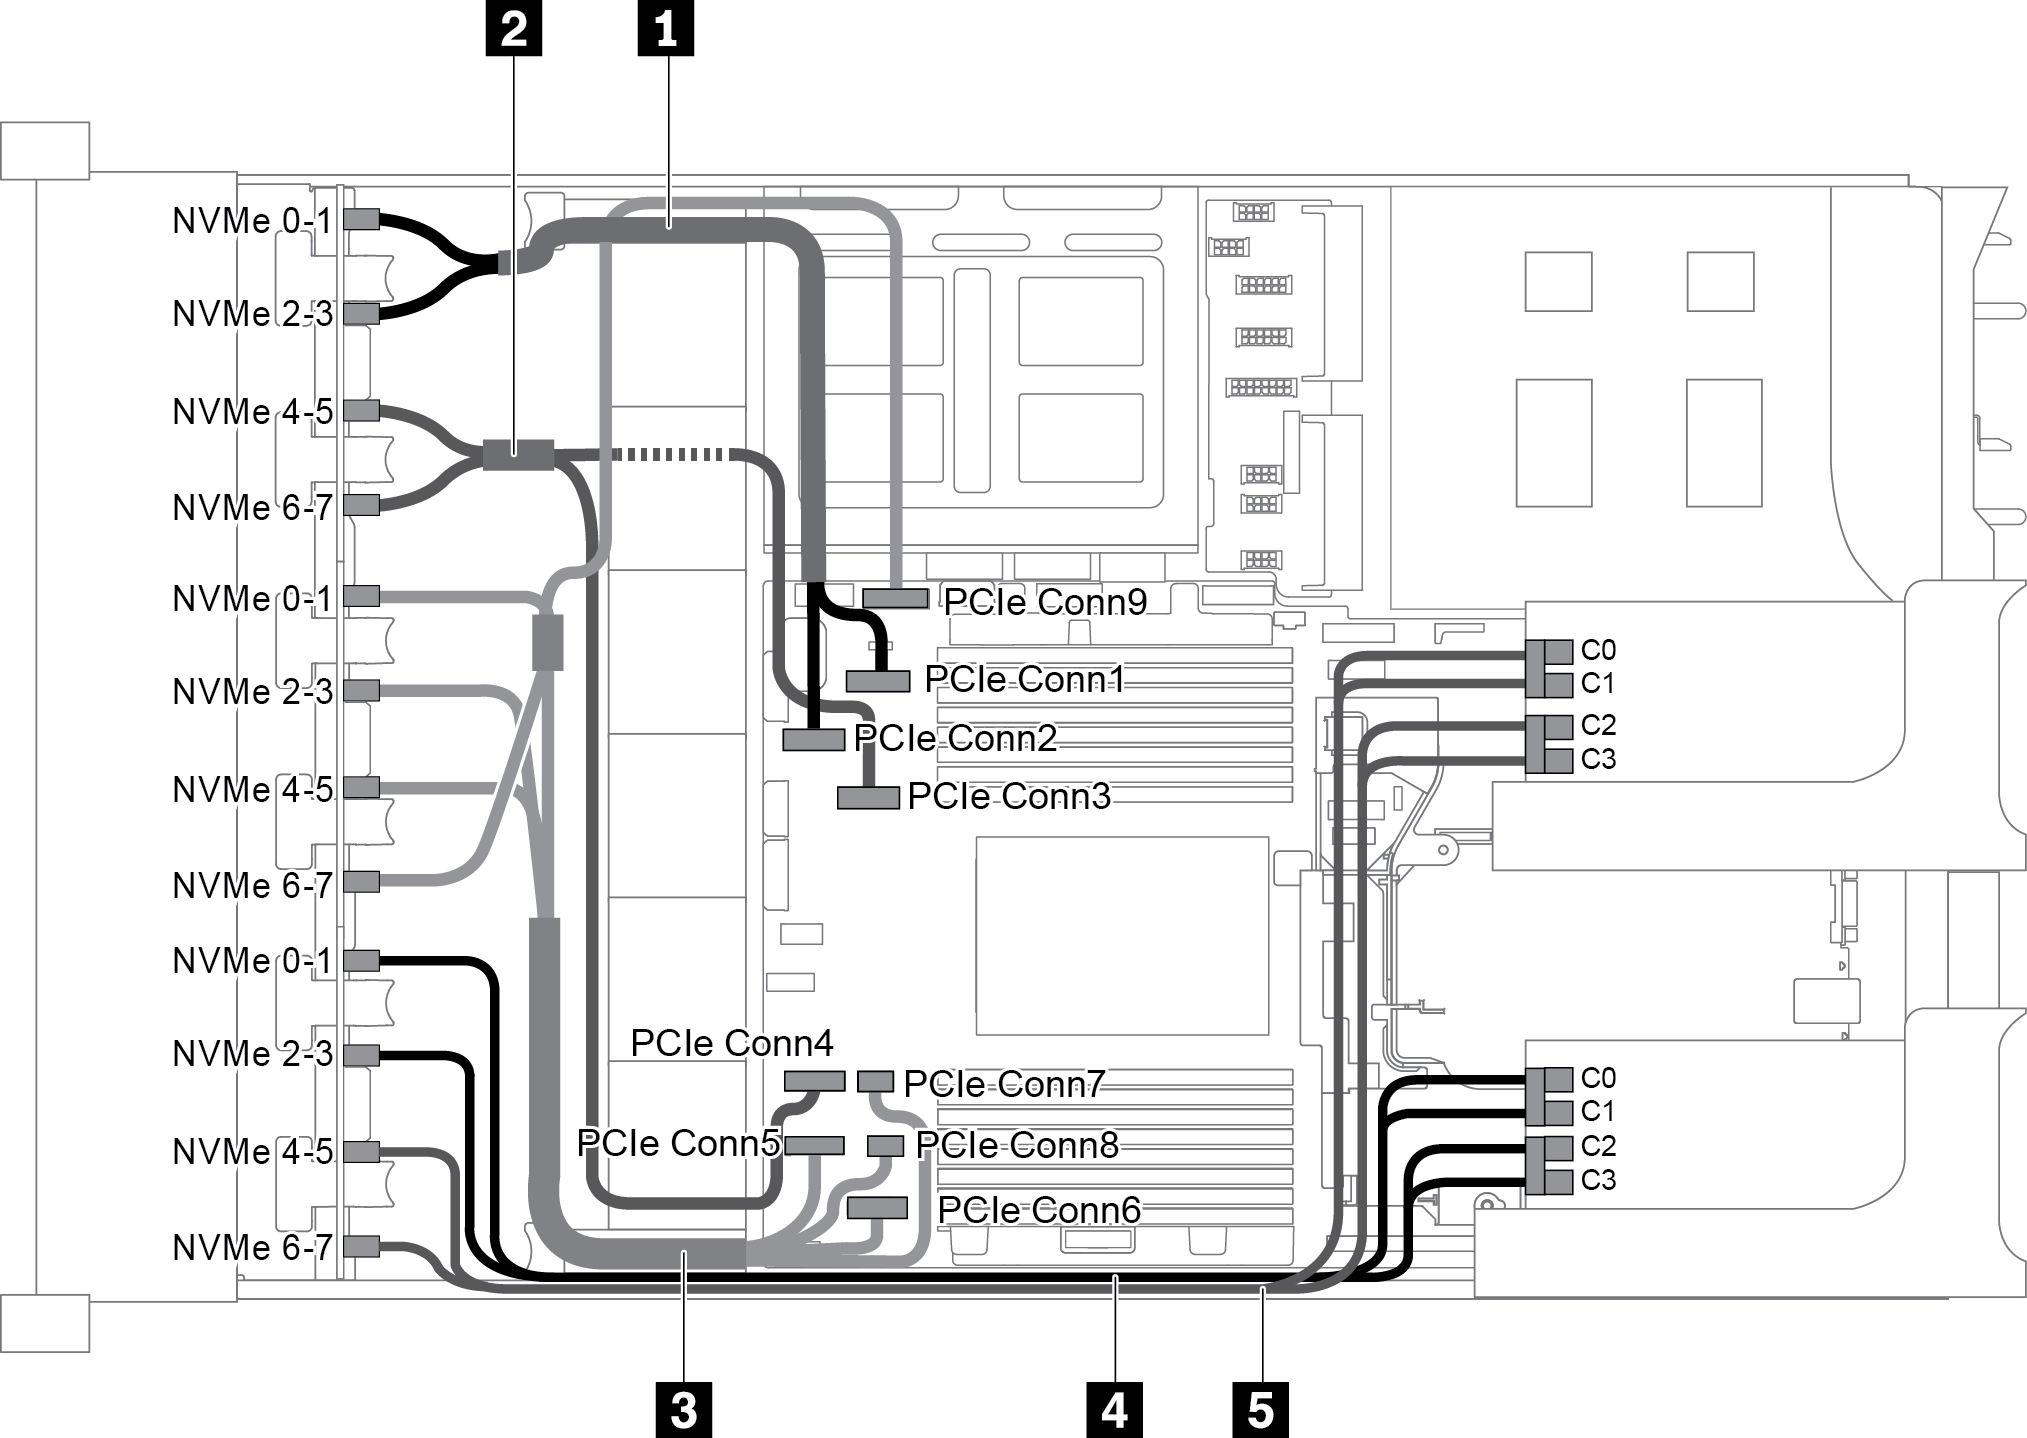 Cable routing for configuration with three 8 x 2.5" NVMe front backplanes and two 810-4P or 1610-4P NVMe switch cards